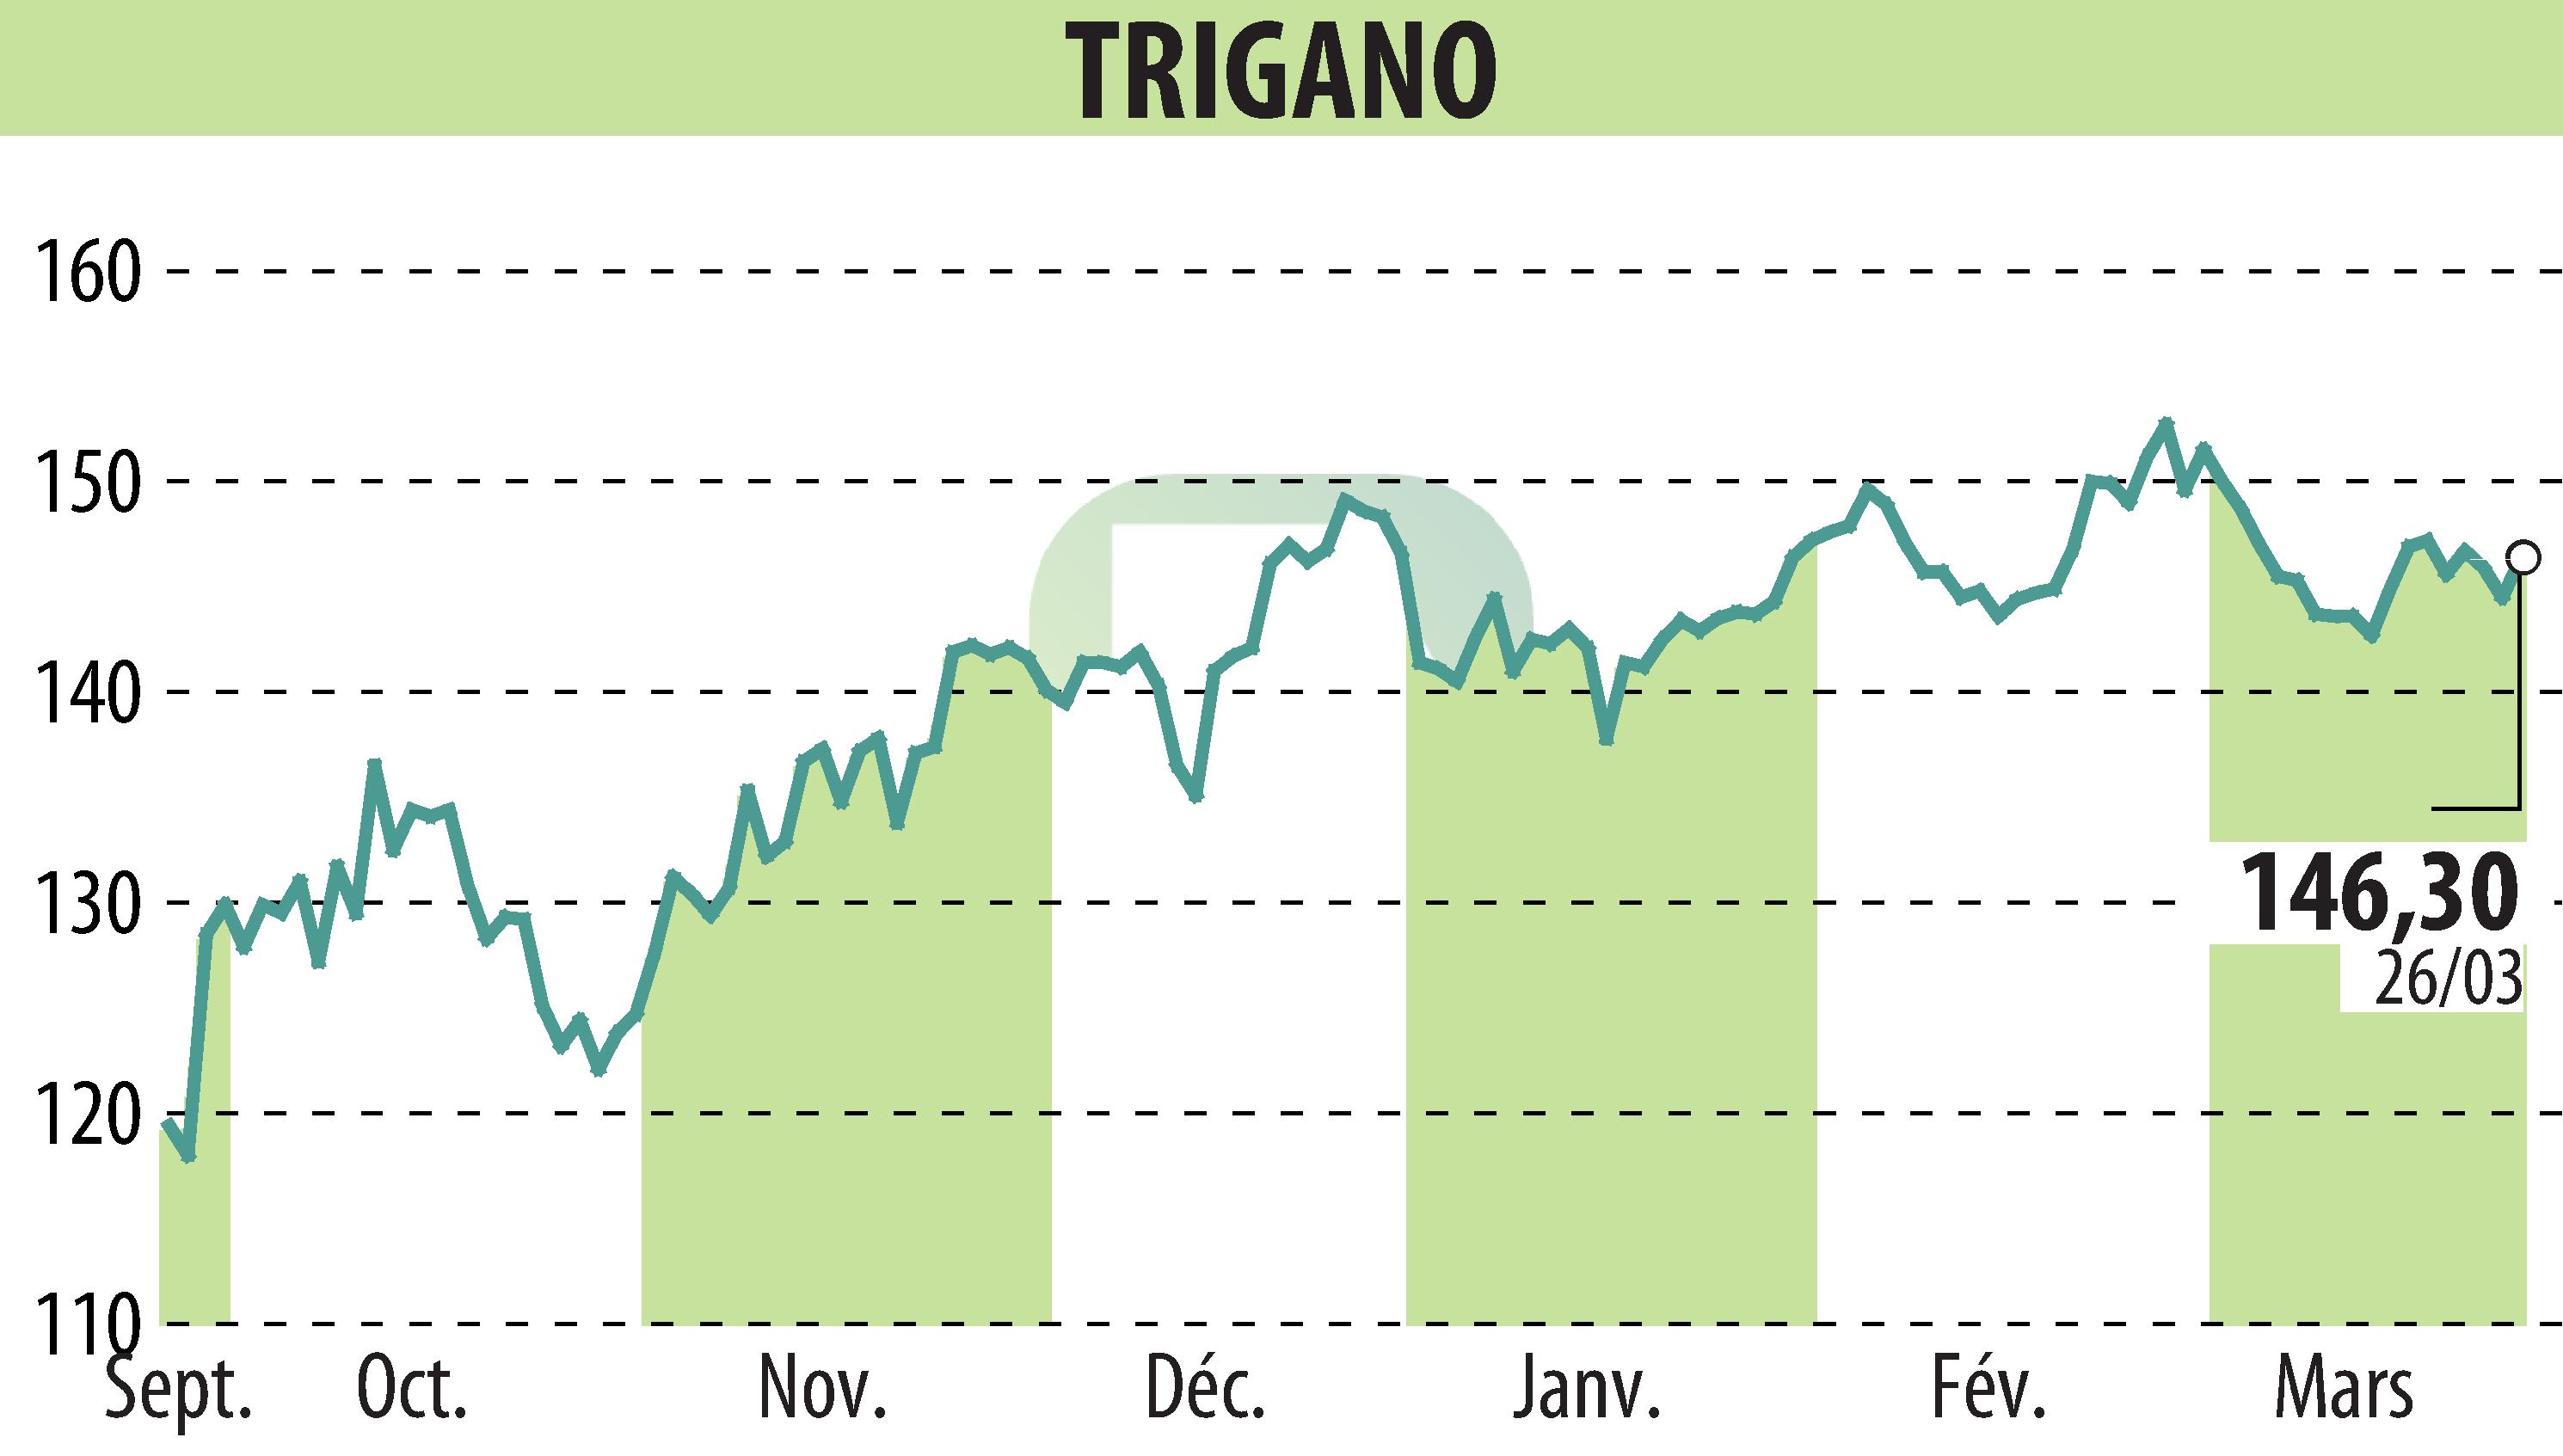 Stock price chart of TRIGANO (EPA:TRI) showing fluctuations.